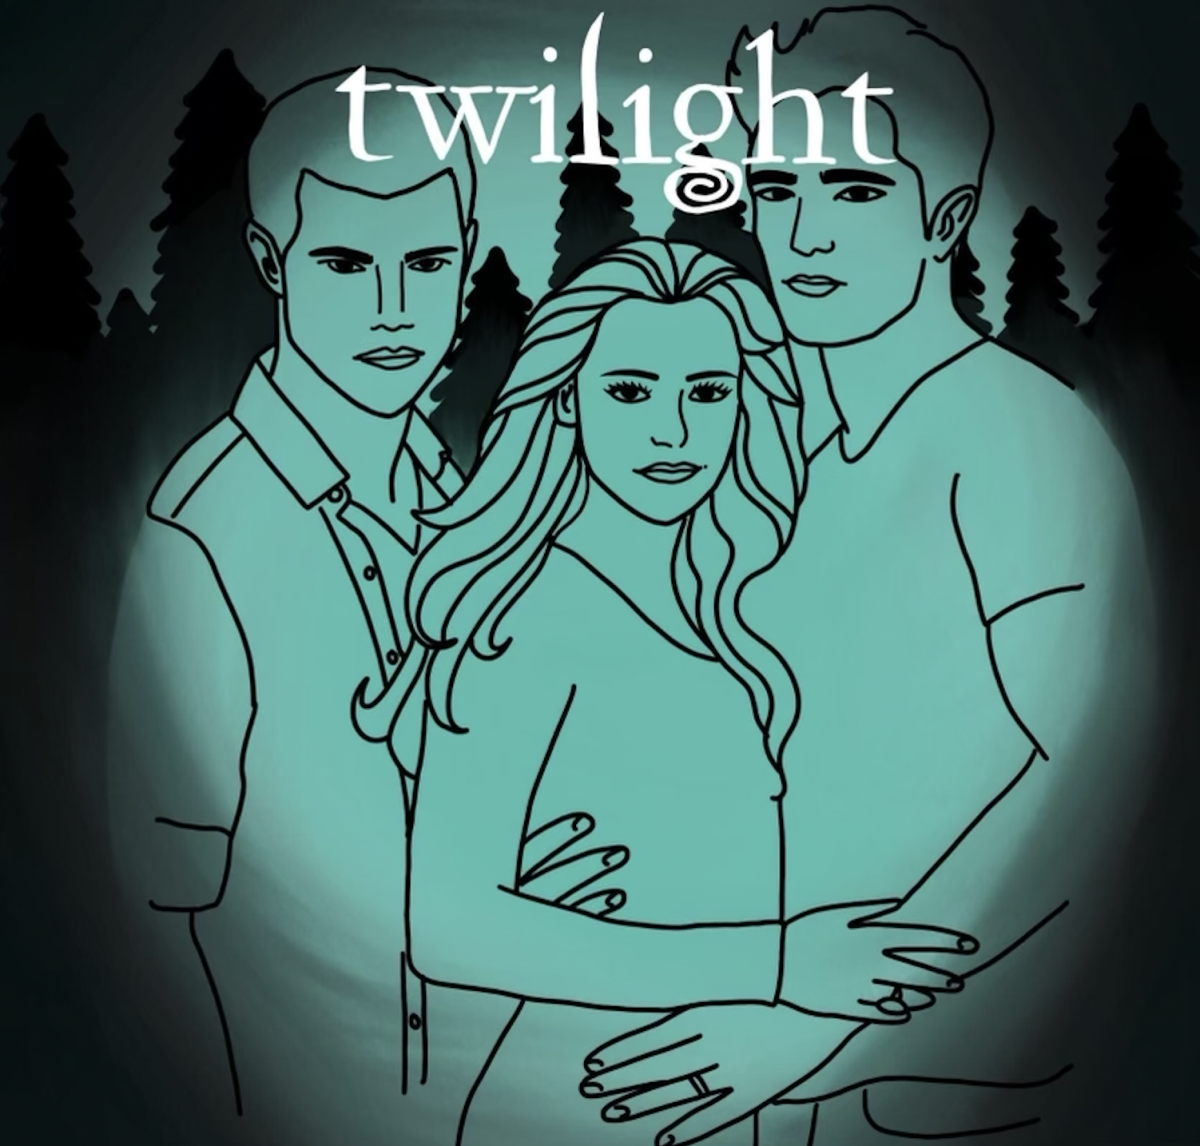 Continue reading for a ranking of the Twilight movies! 